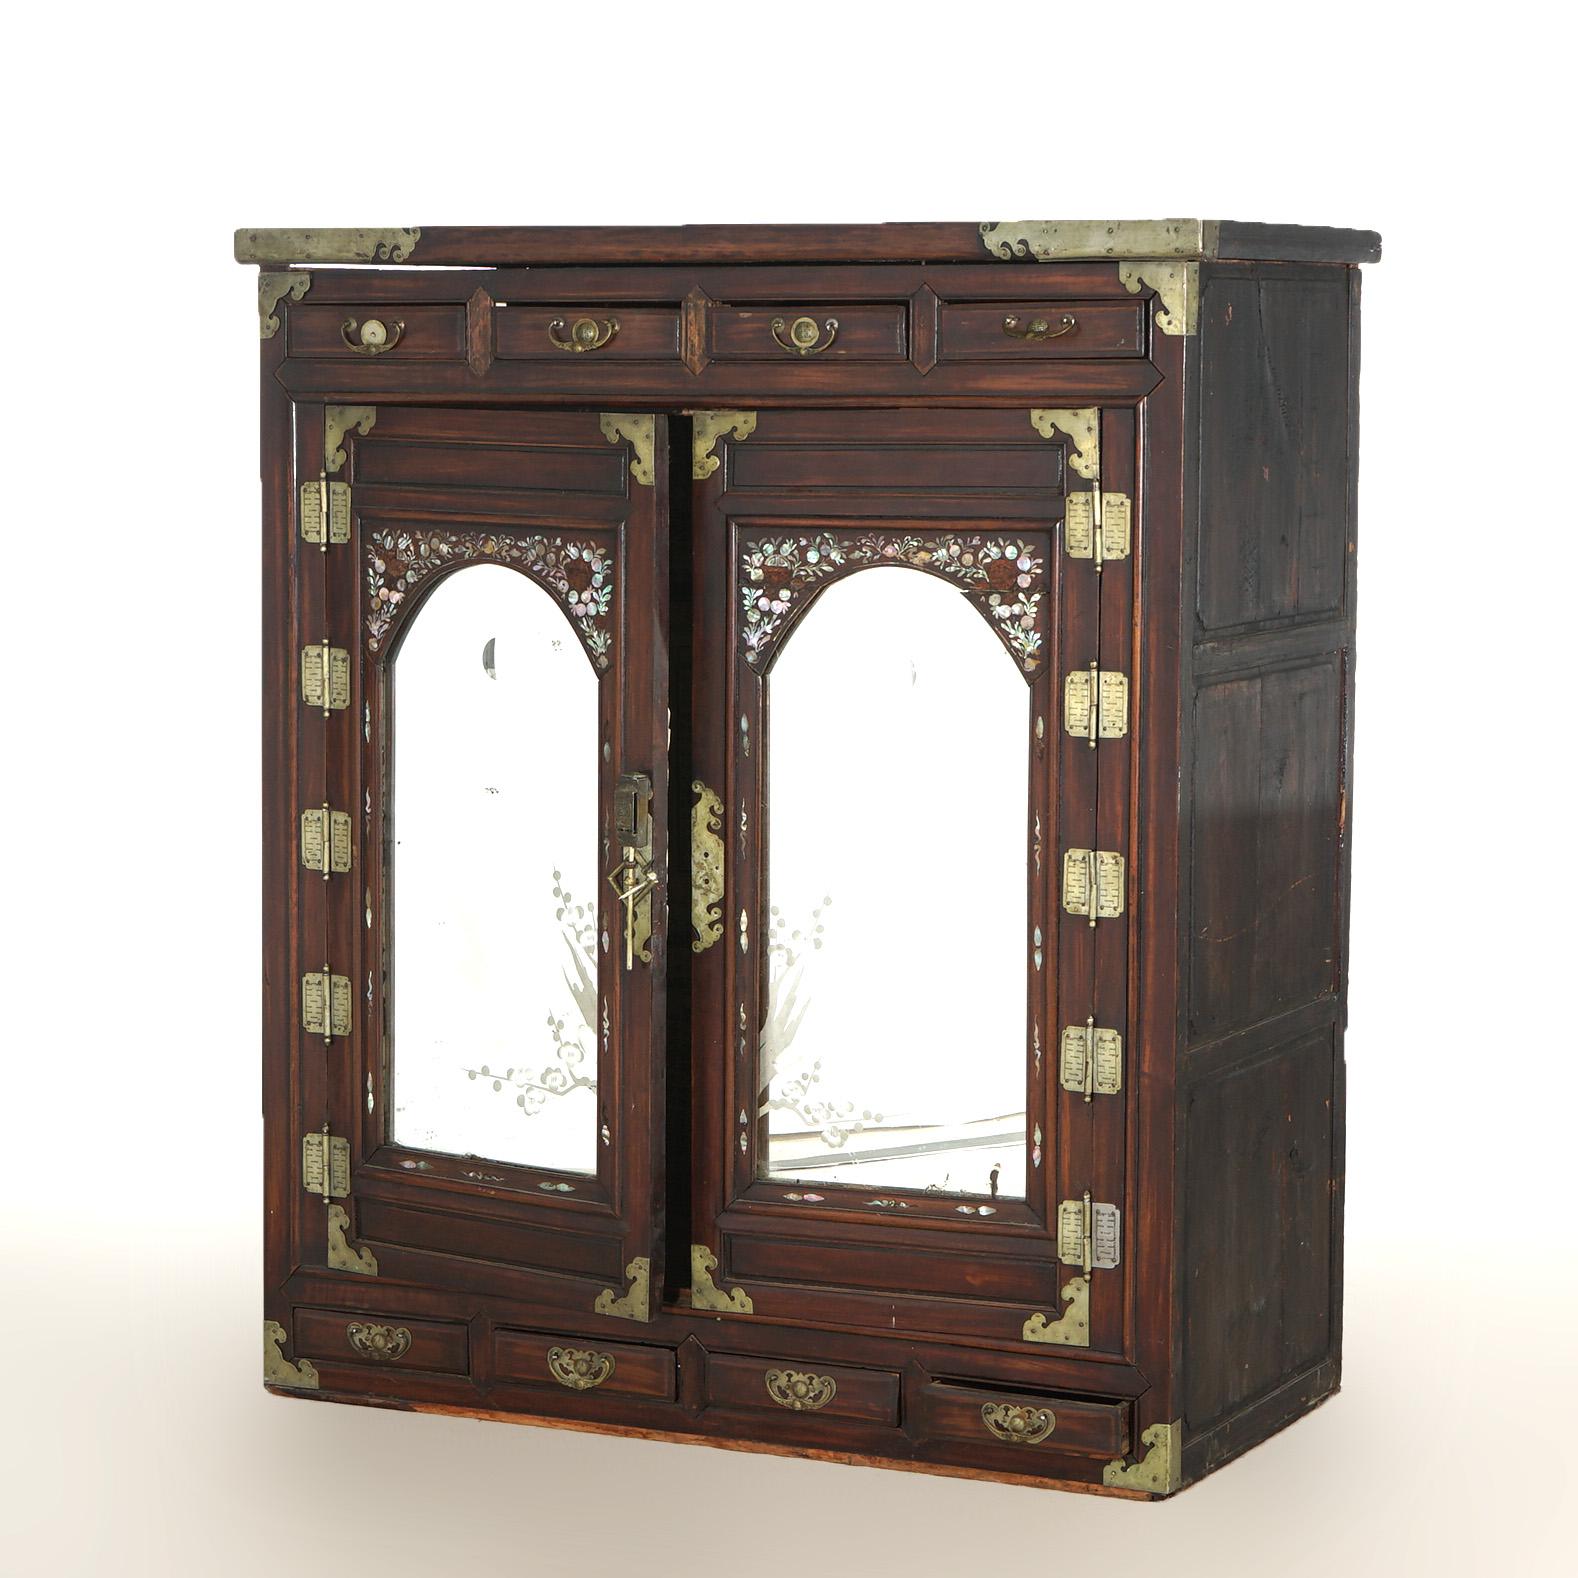 ***Ask About Reduced In-House Shipping Rates - Reliable Service & Fully Insured***

An antique Chinese wedding cabinet offers hardwood construction with double doors having arched mirrors, inlaid mother of pearl decoration, and strap hinges opening